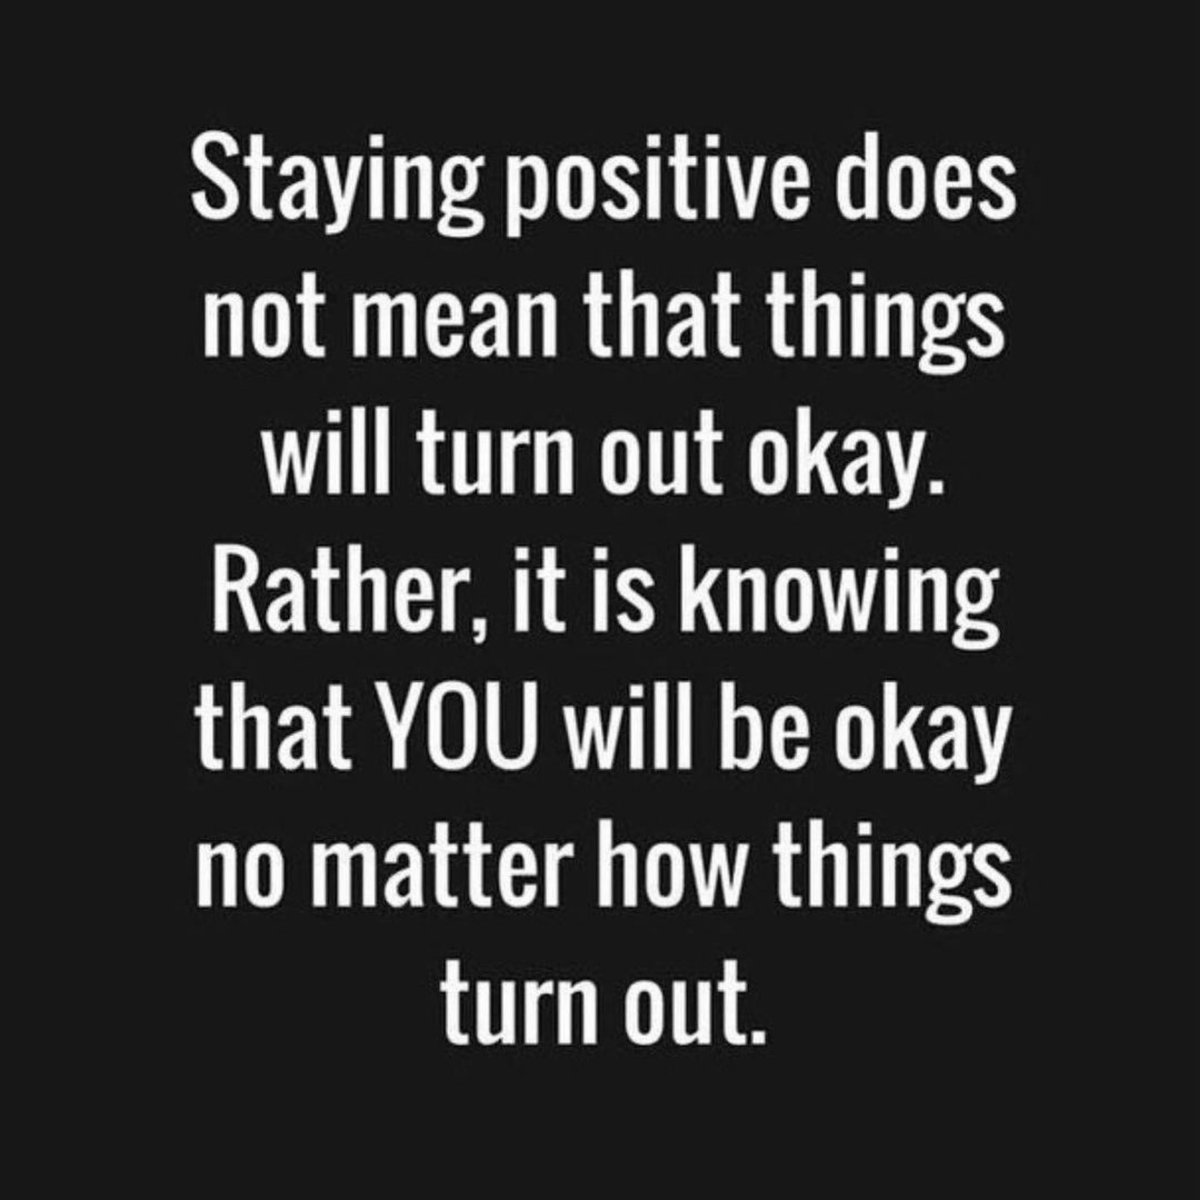 Being positive doesn’t mean you ignore or lie to yourself about problems you face—it means you know you have the ability to overcome them! Keep the faith. #edchat